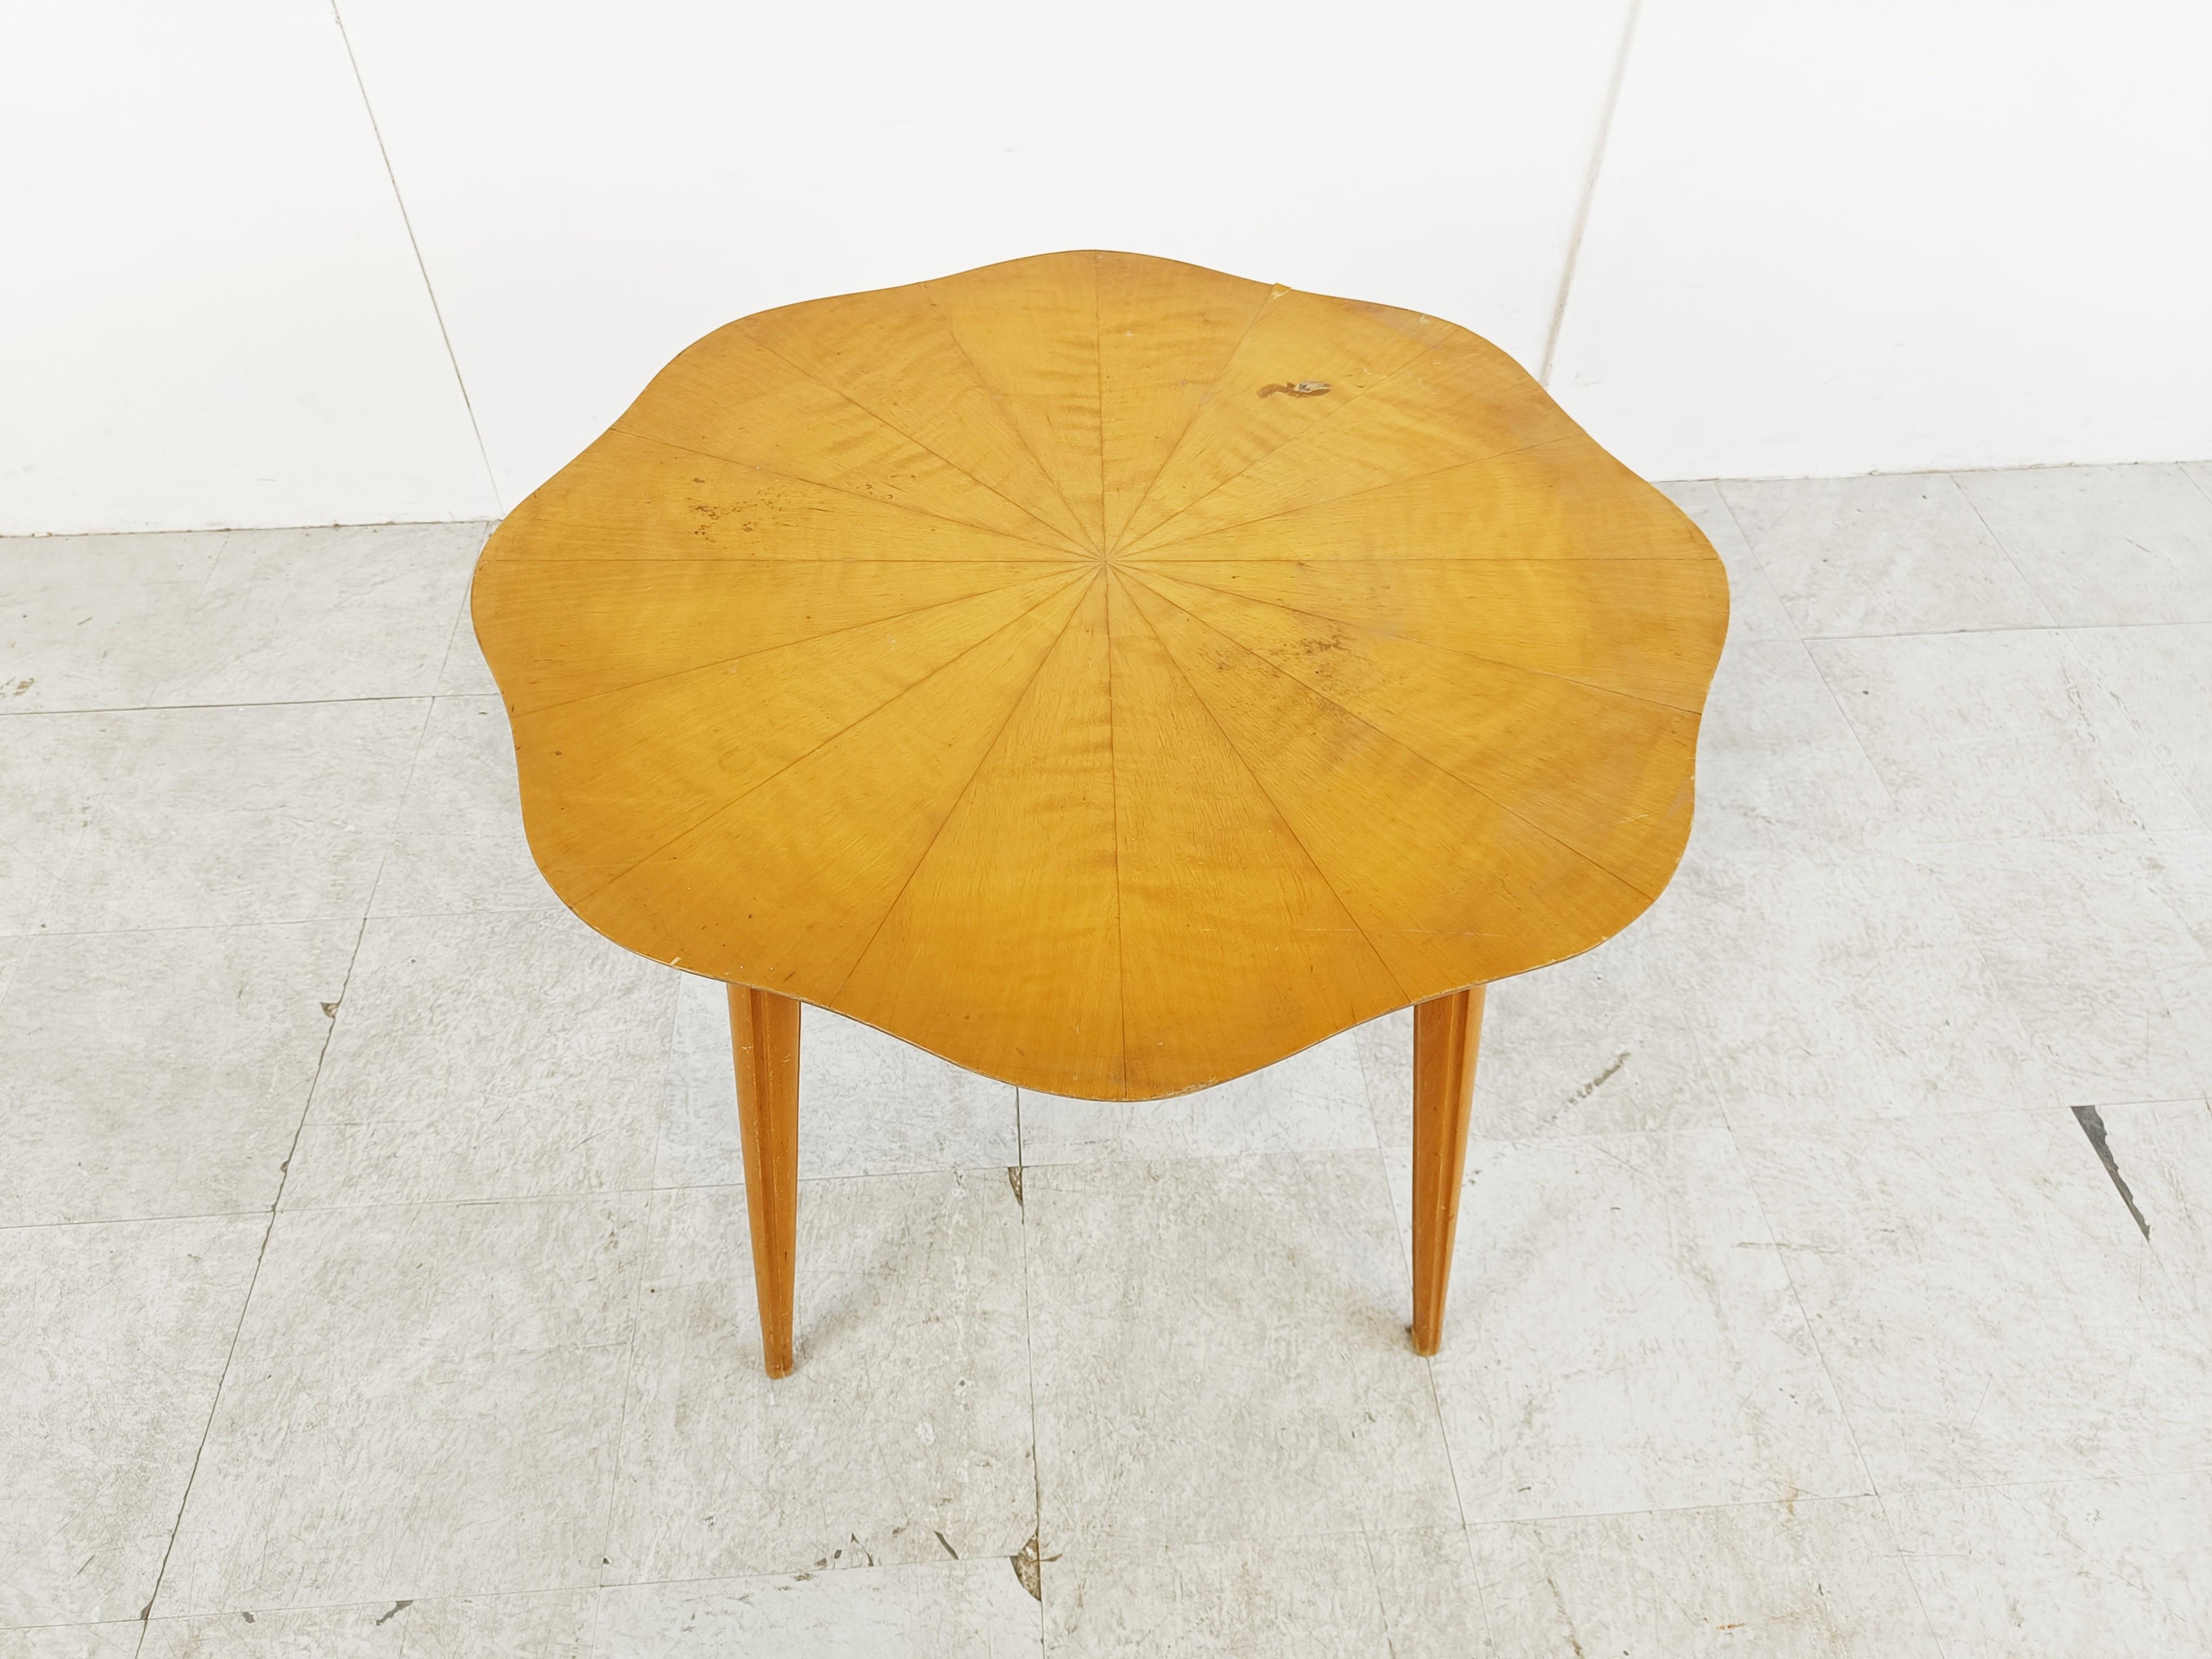 Elegant flower shaped wooden side table from the 1940s.

Very elegant side table.

1940s - France

used condition, with some wear on the veneered table top.

Height: 57cm/22.44